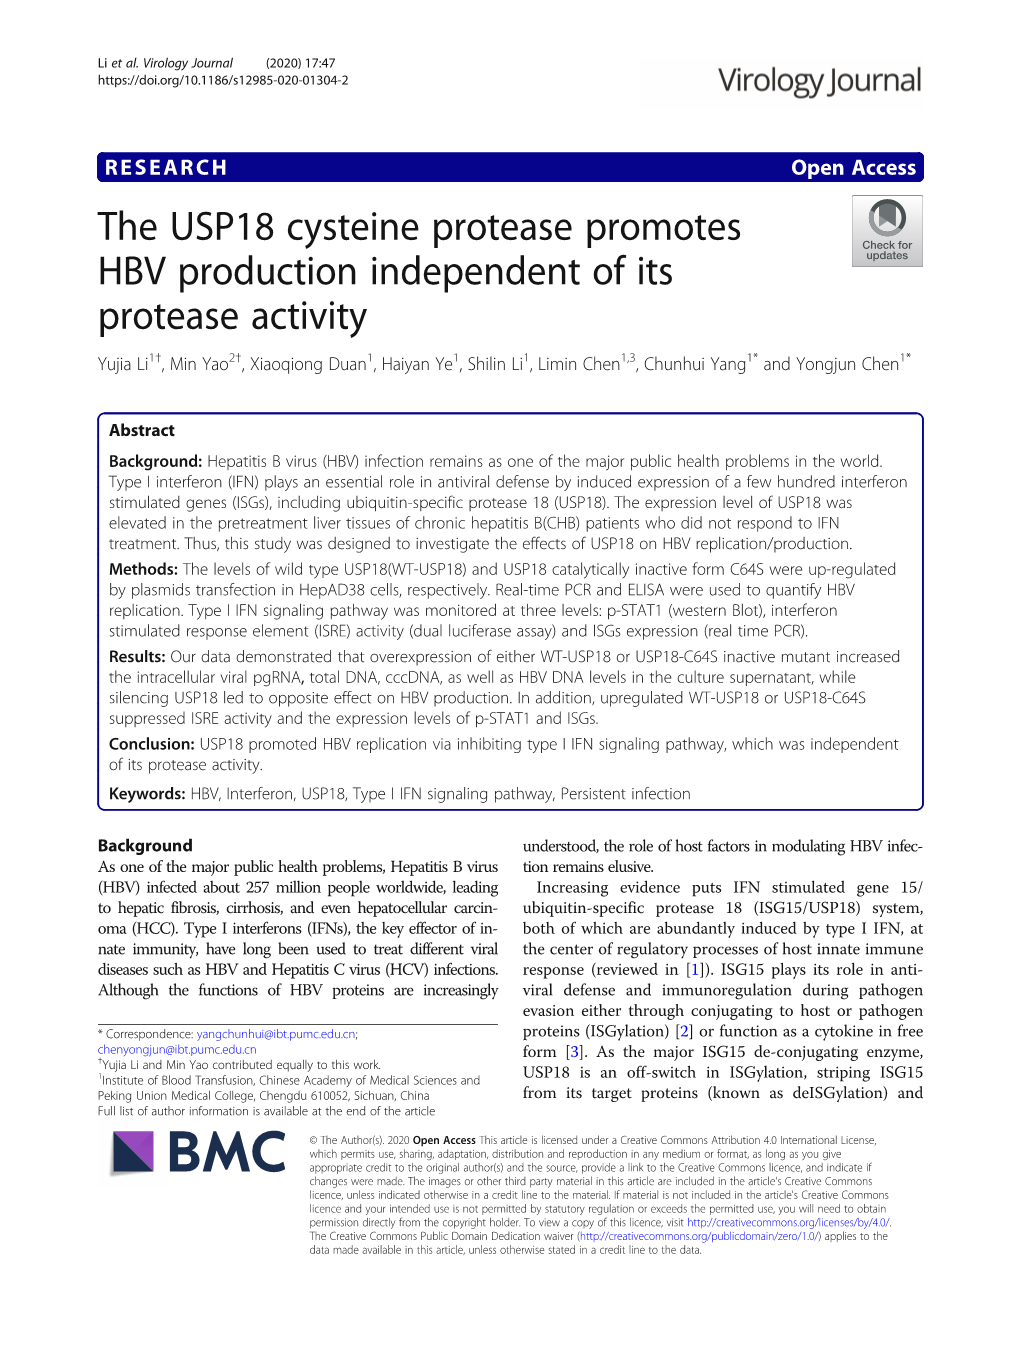 The USP18 Cysteine Protease Promotes HBV Production